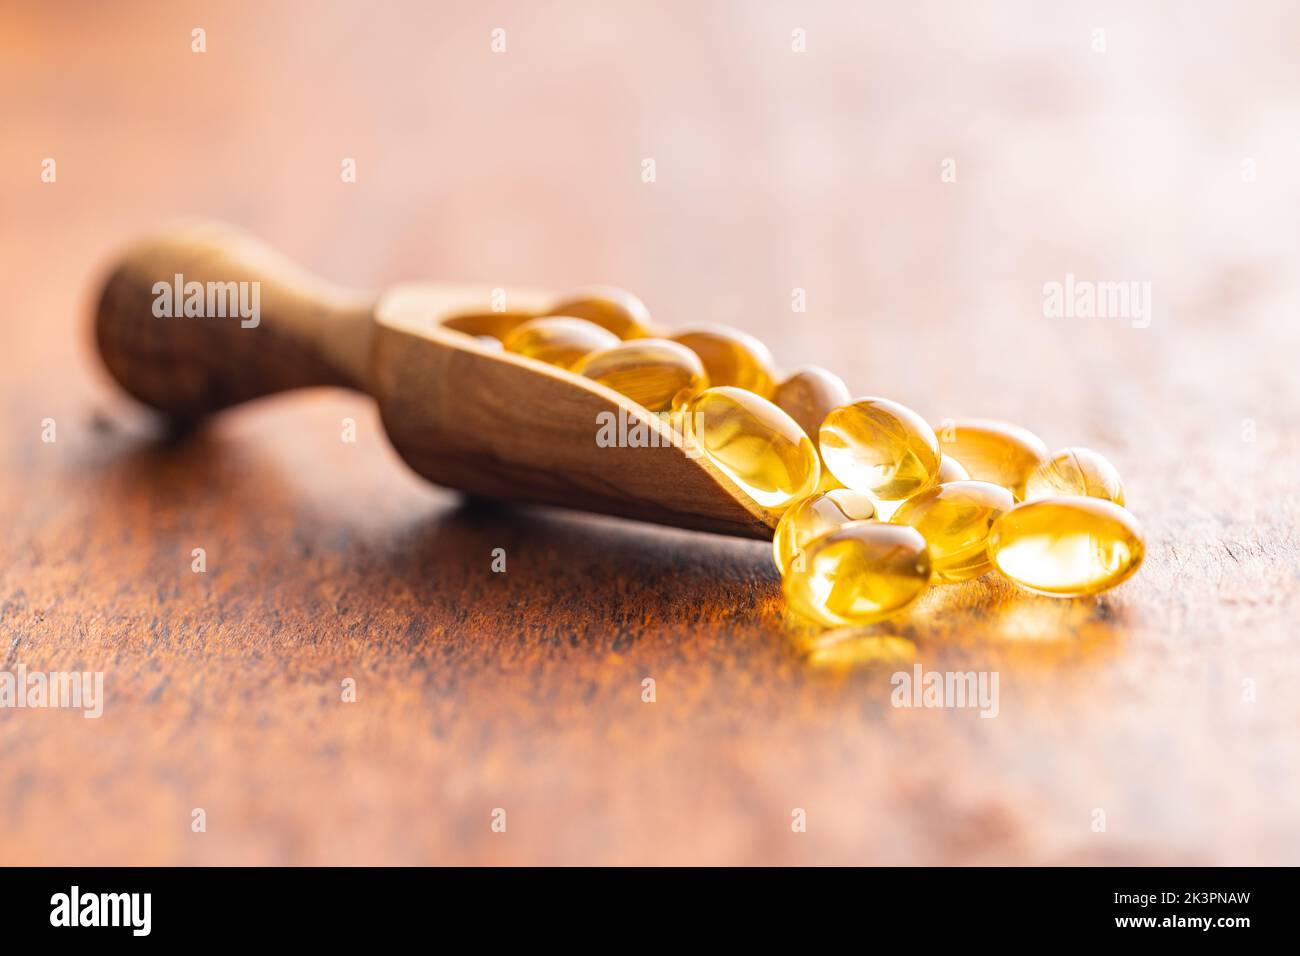 Fish oil capsules. Yellow omega 3 pills in wooden scoop on the wooden table. Stock Photo